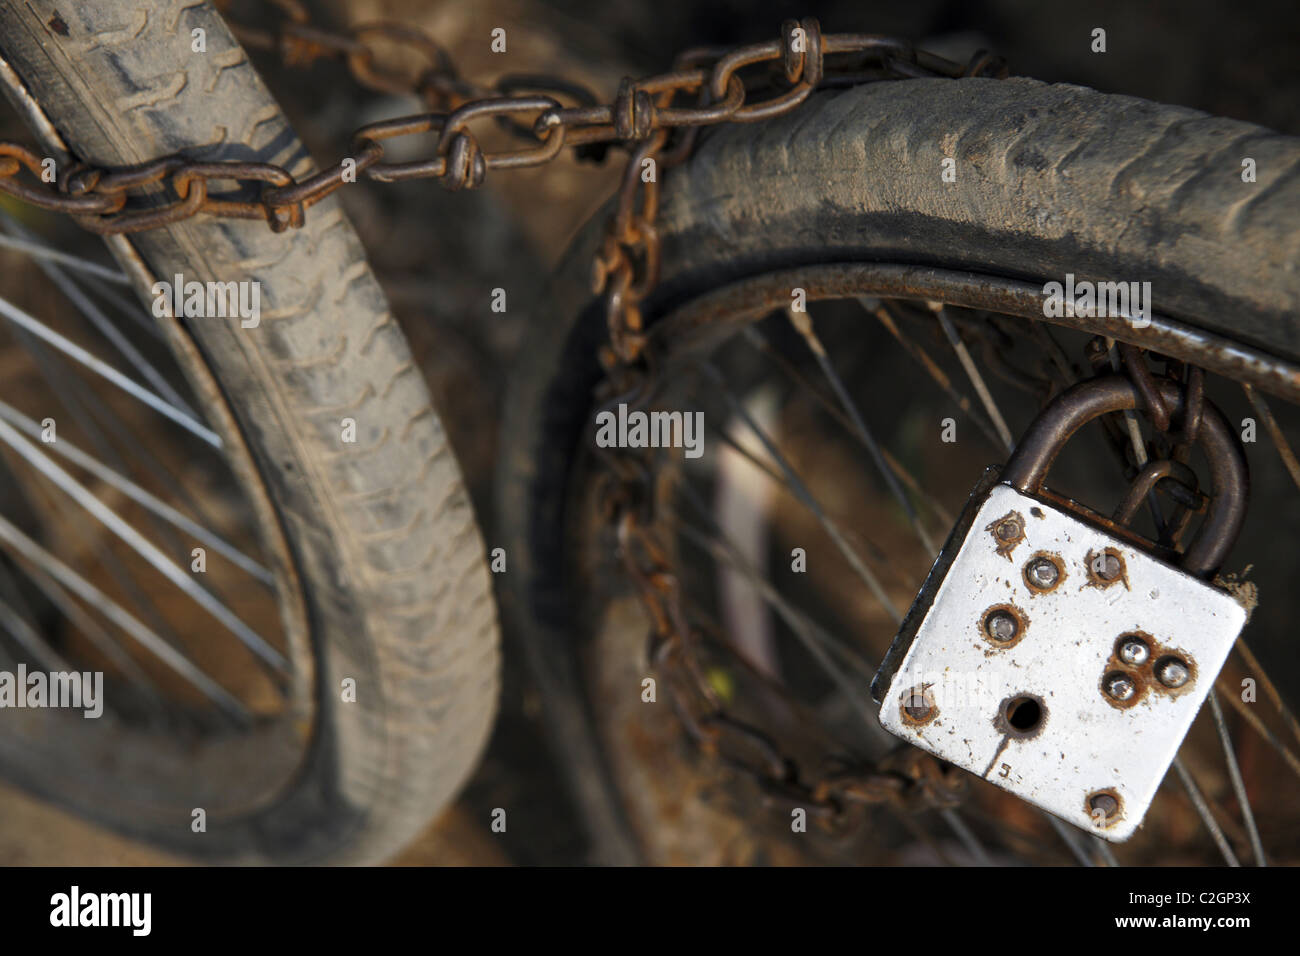 IND, India,20110310, Old bicycle Stock Photo